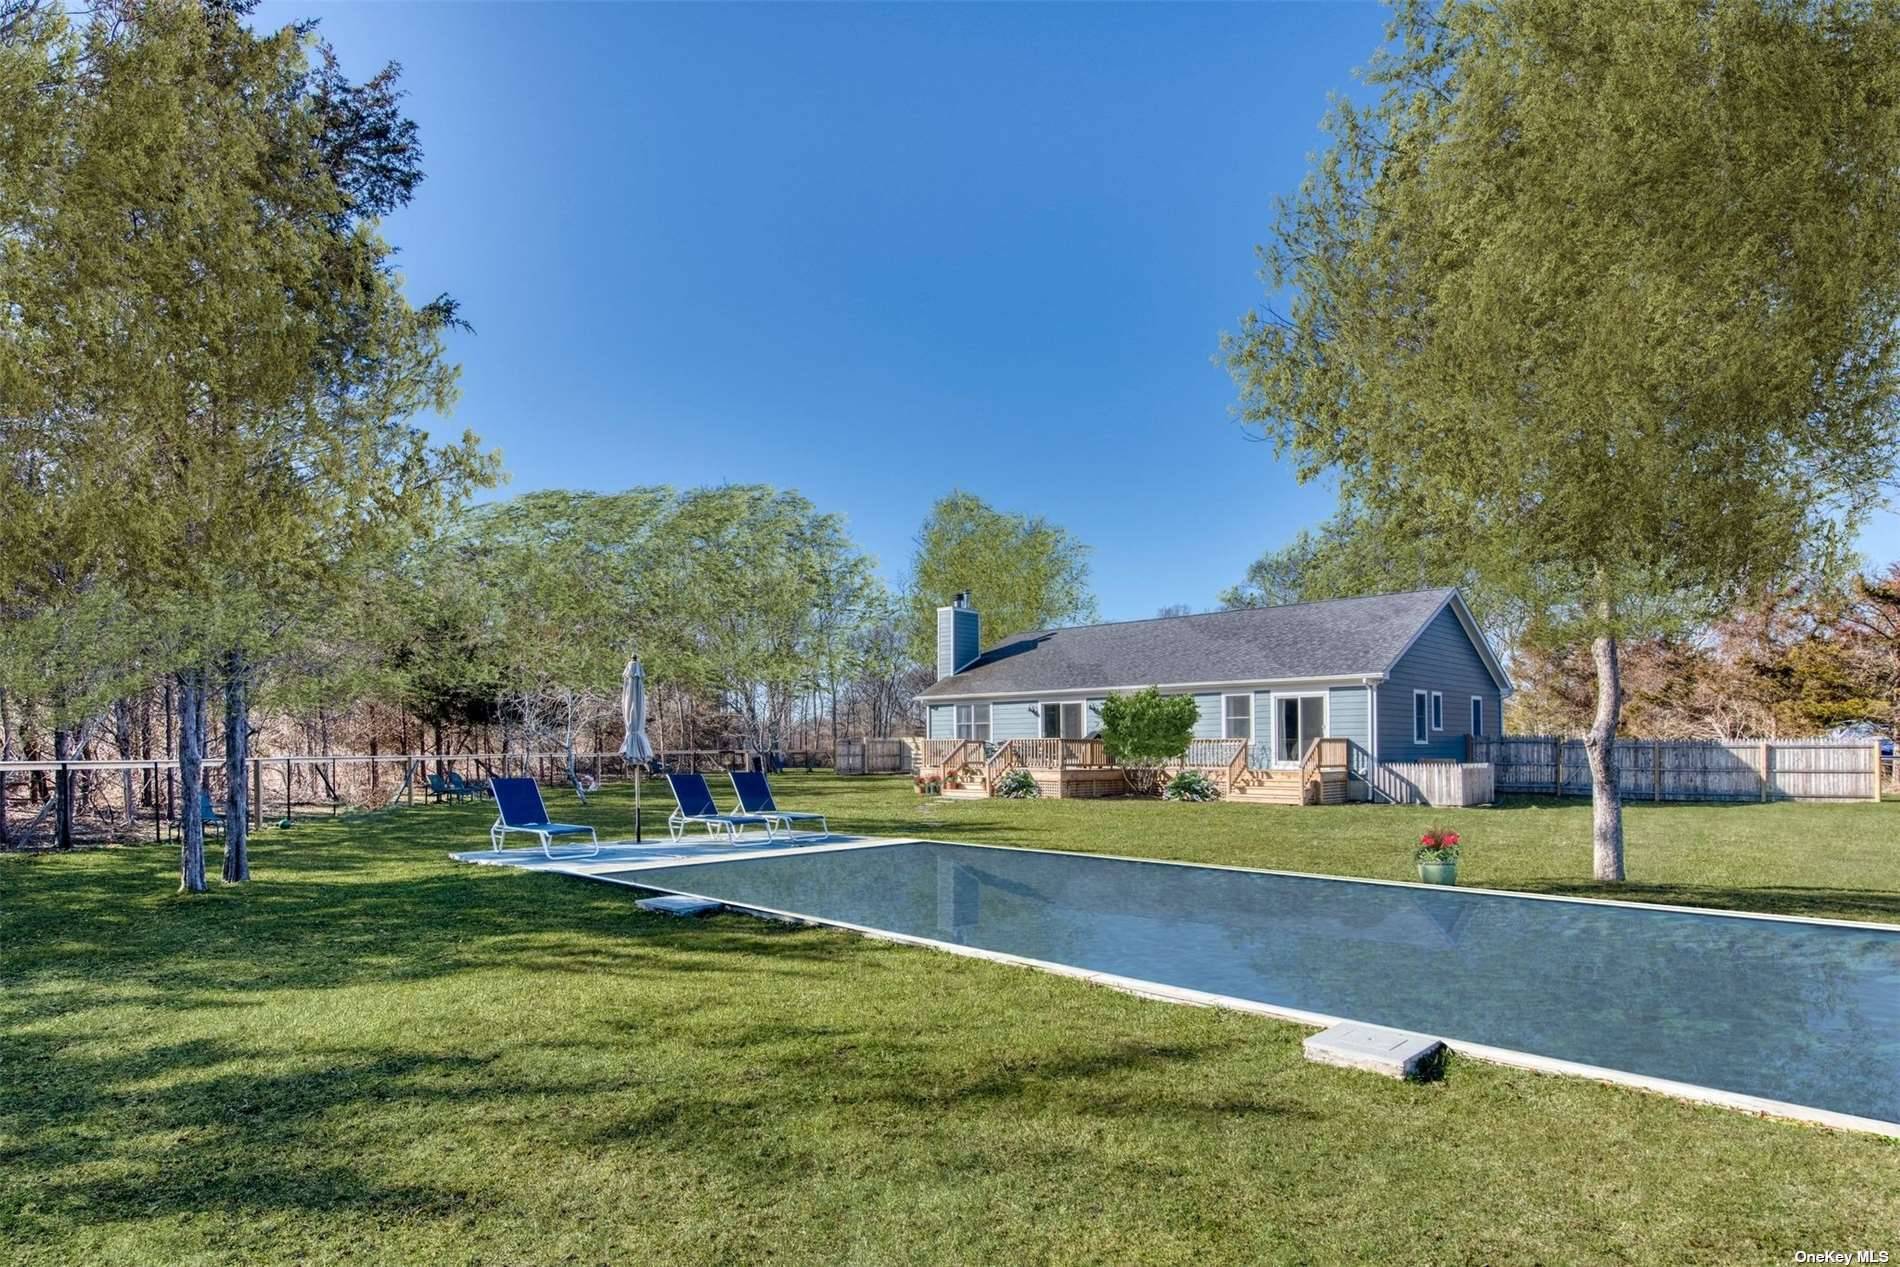 Complete privacy and quiet welcome you to this triple mint renovated home set on an acre adjacent to preserved land.